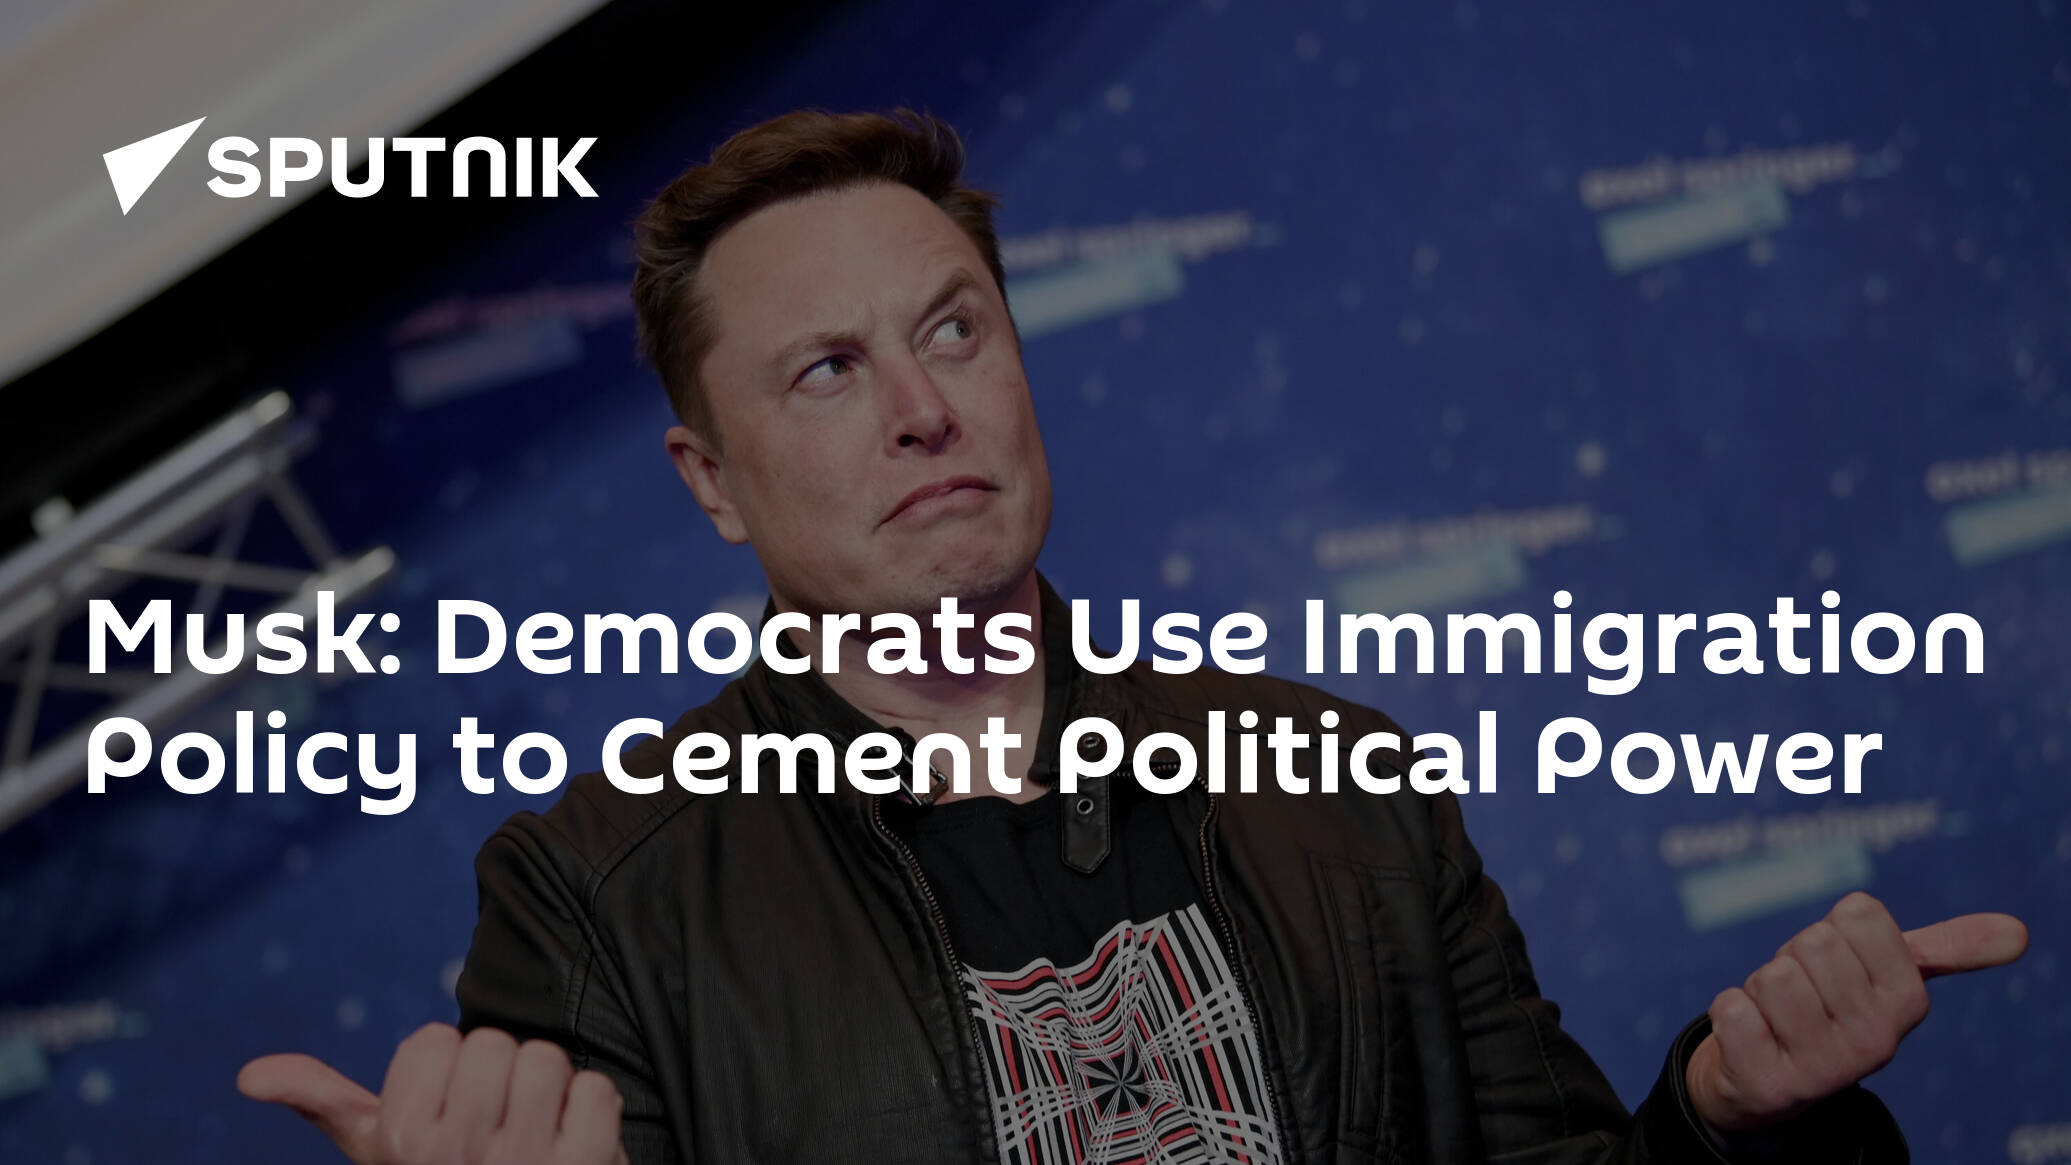 Musk: Democrats Use Immigration Policy to Cement Political Power